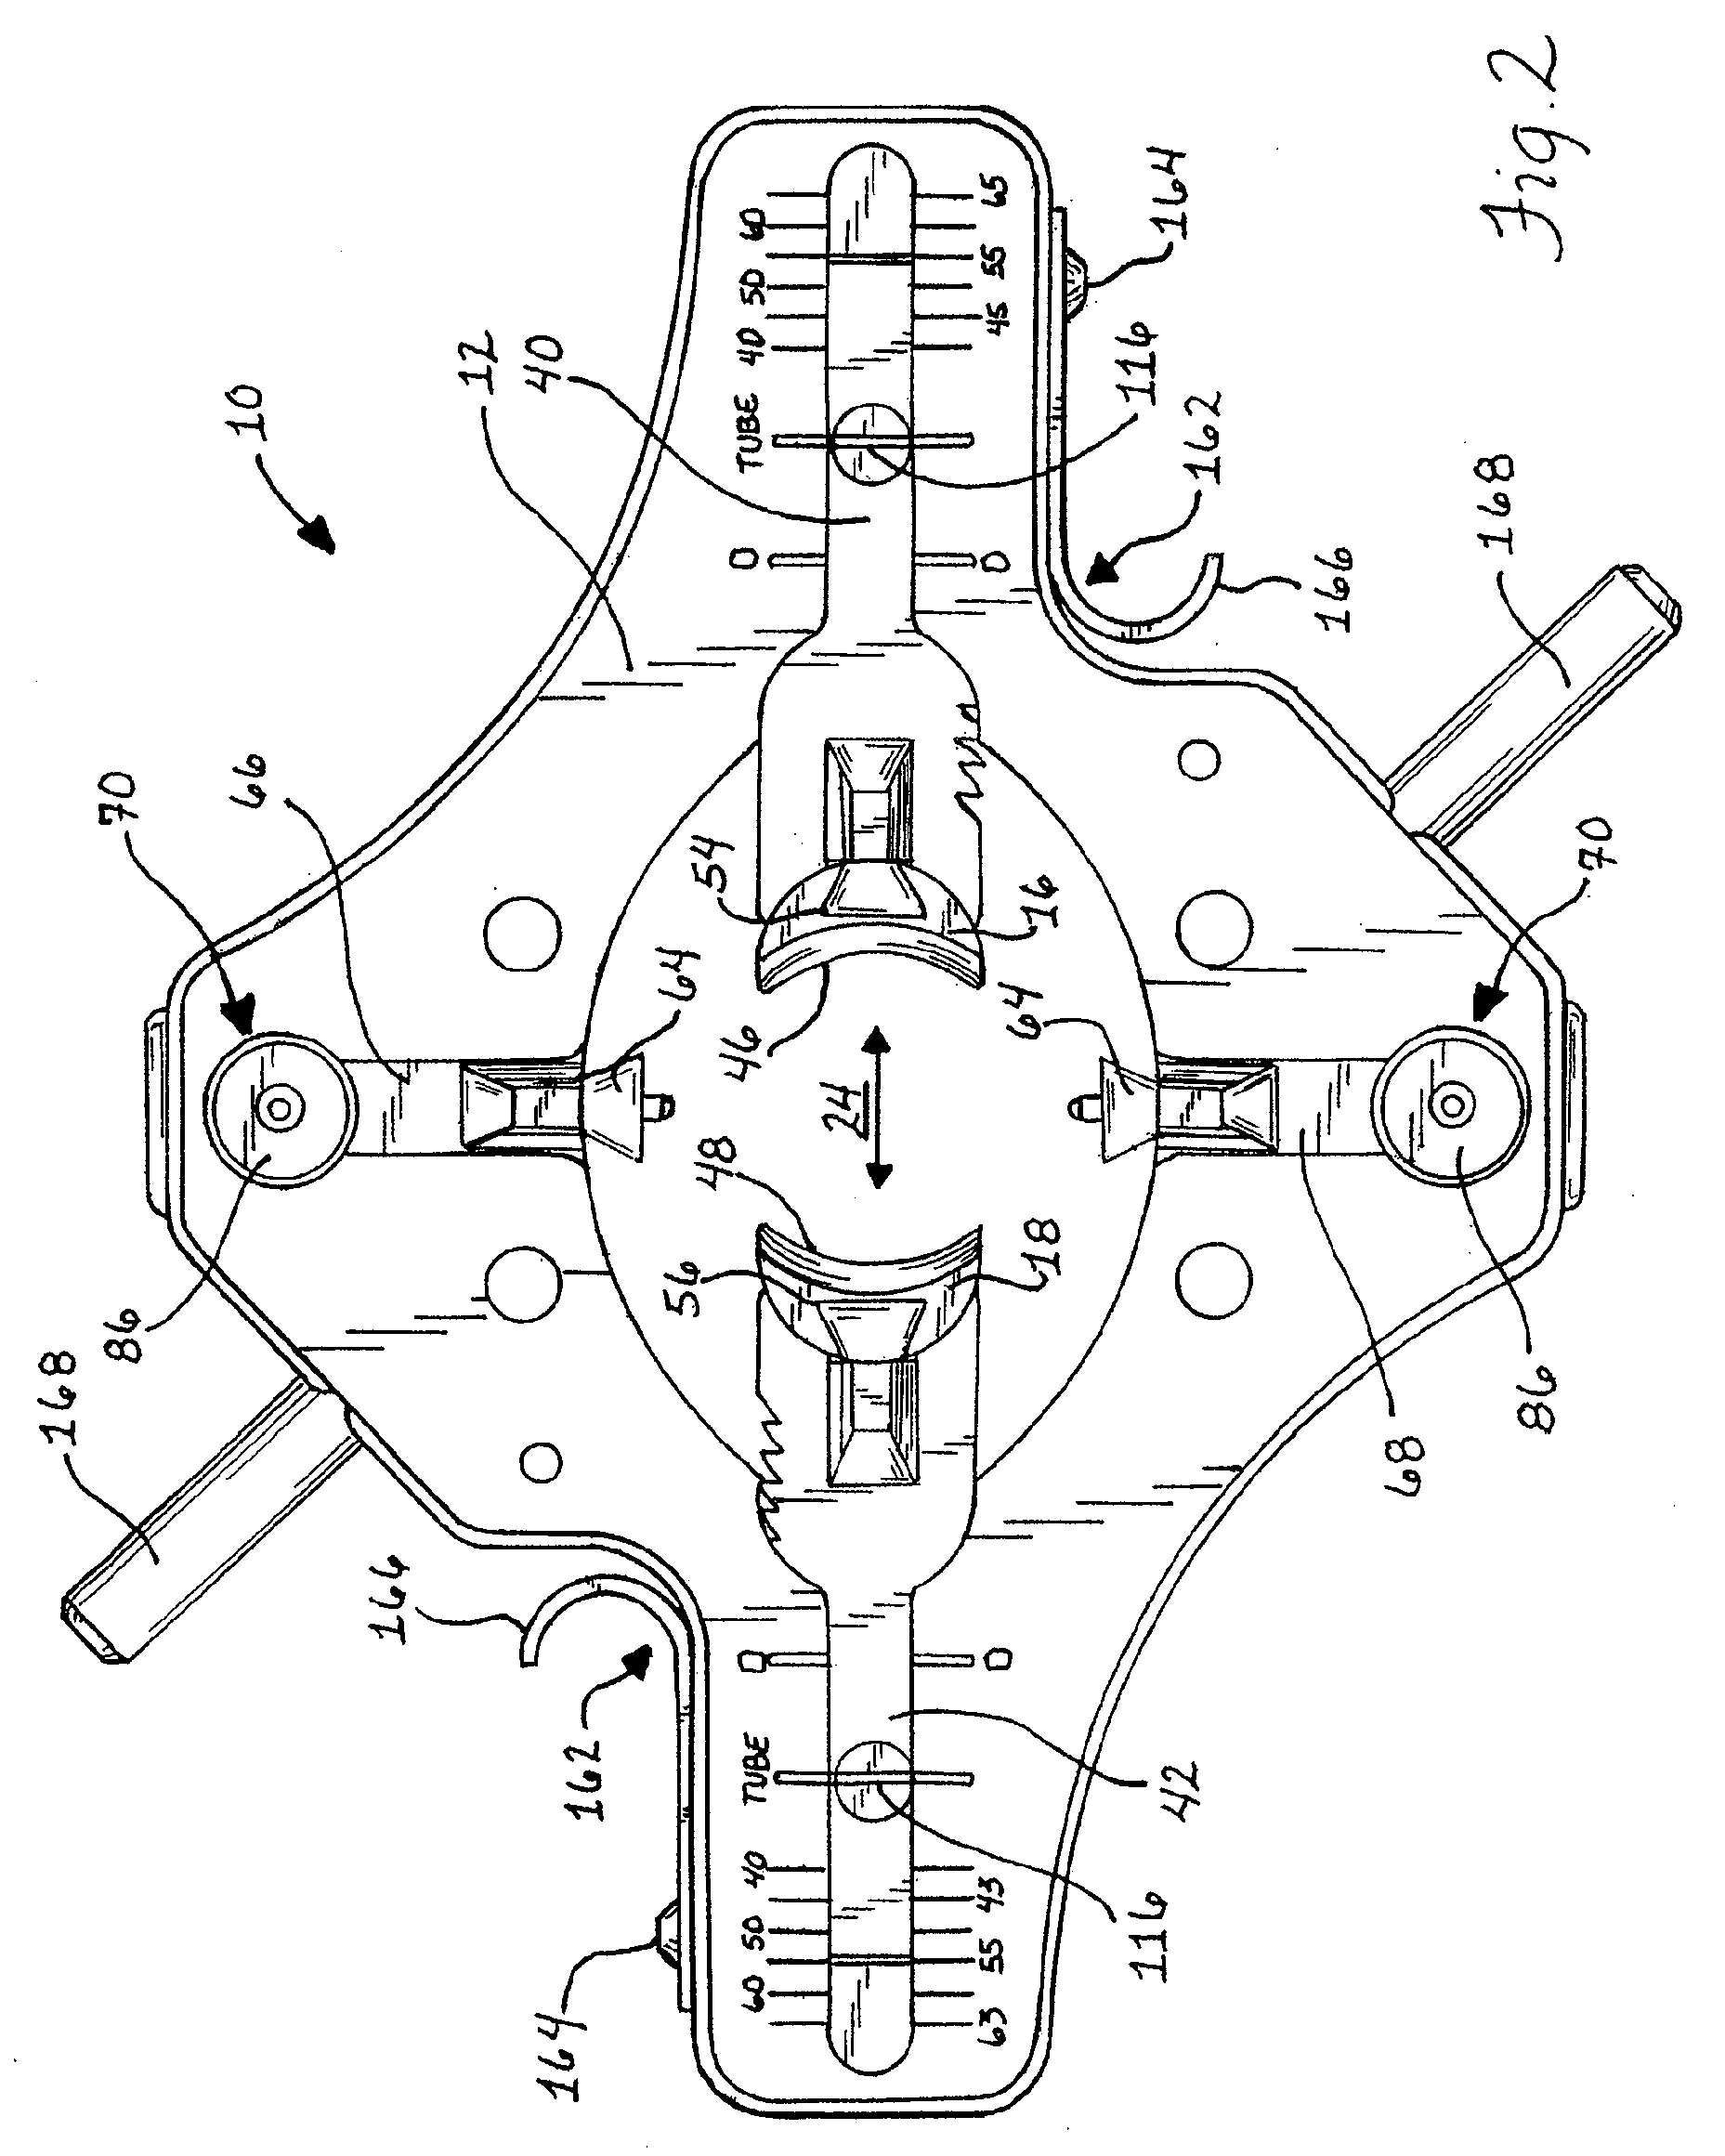 Retraction Apparatus And Method Of Use